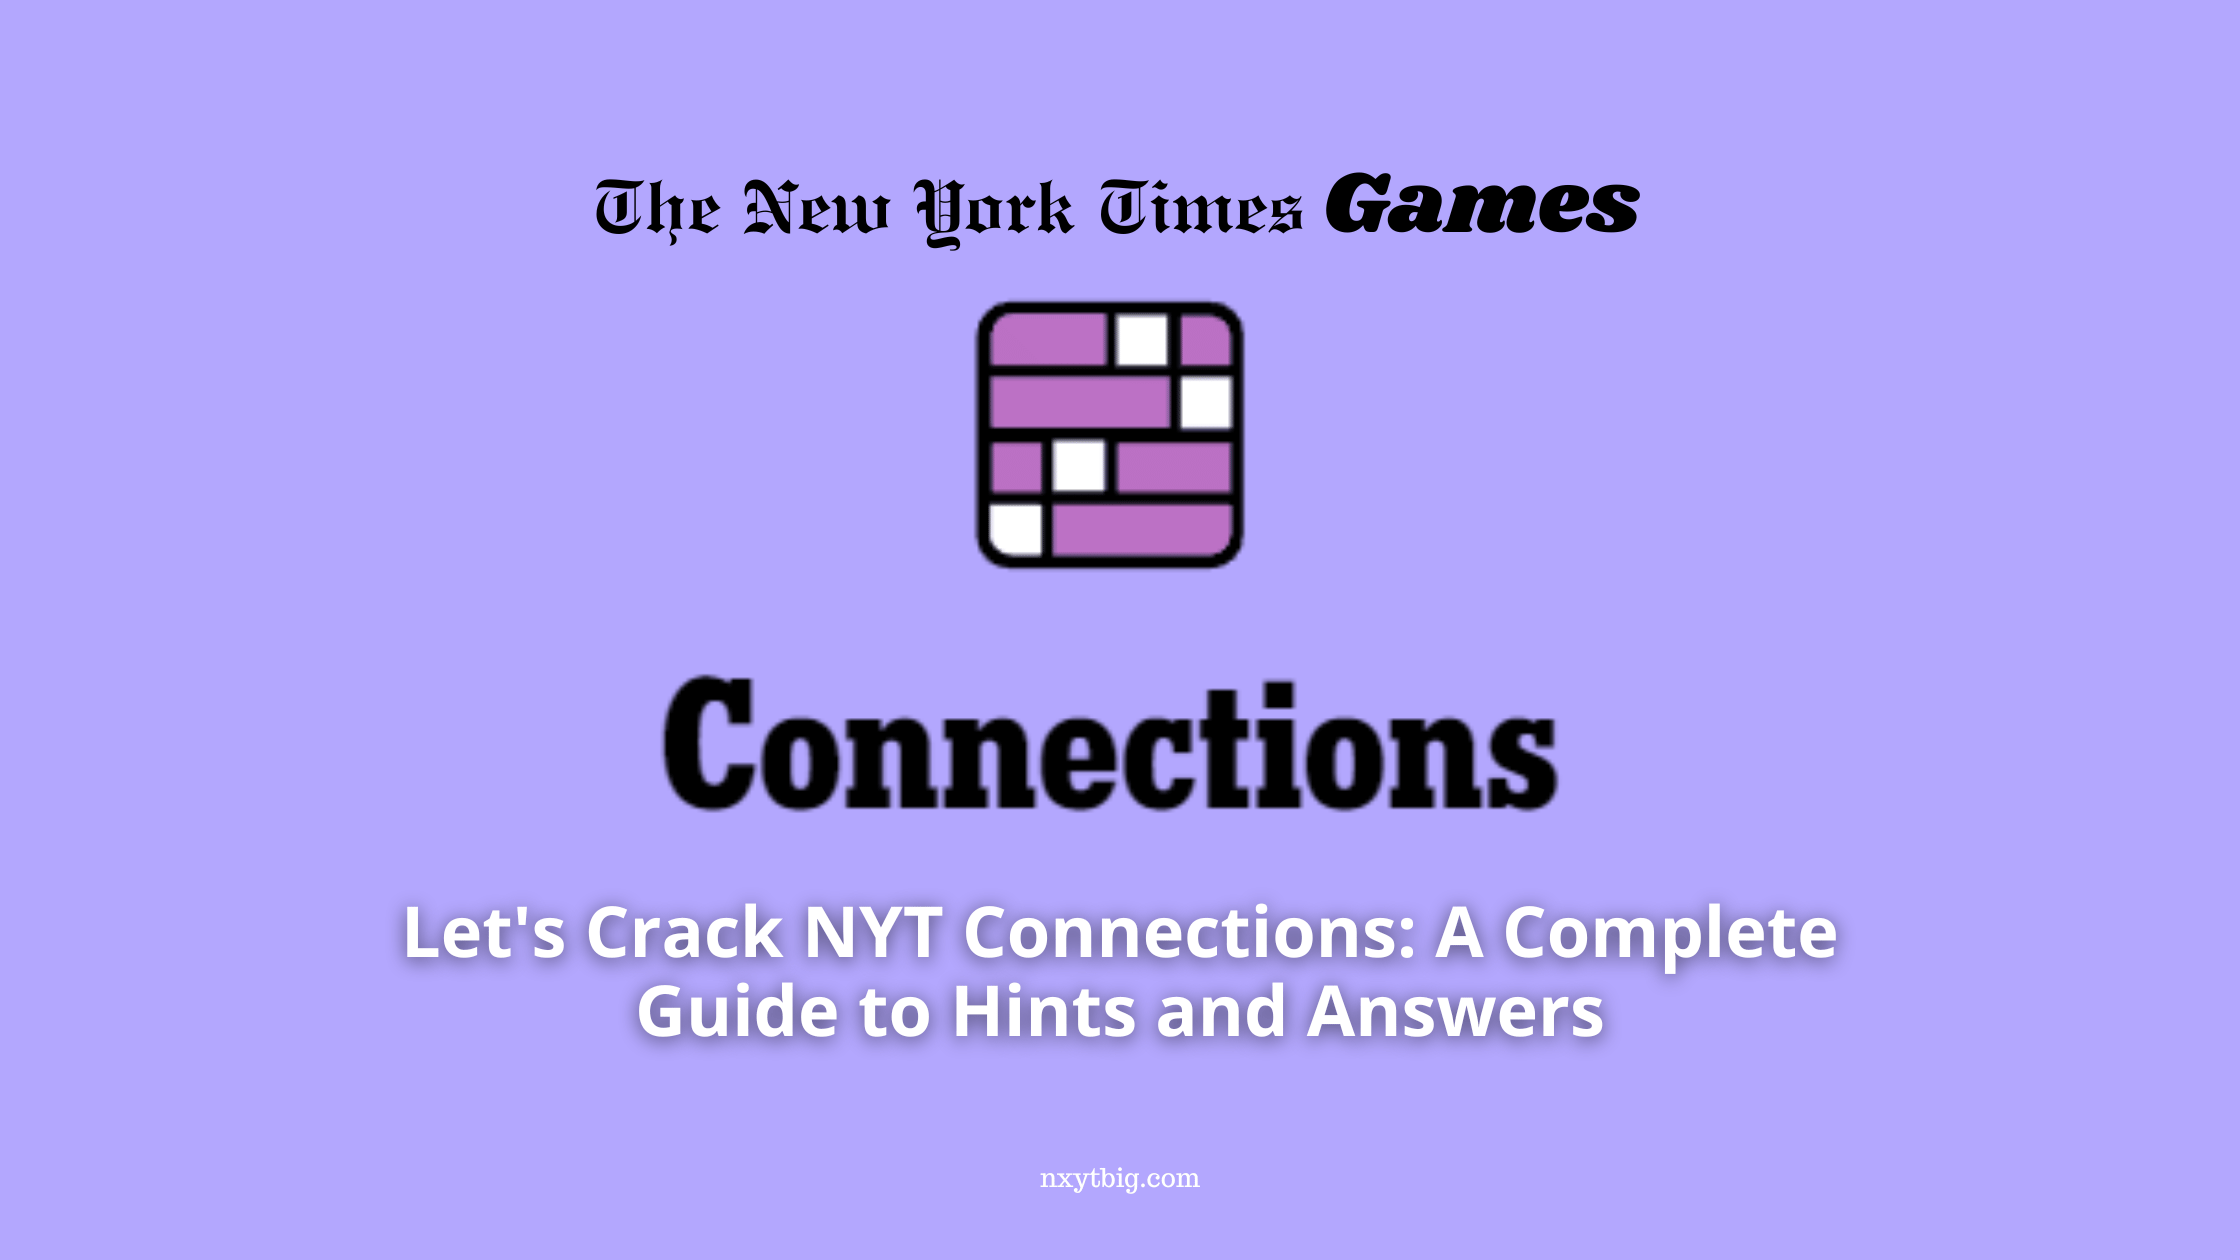 Let’s Crack NYT Connections: A Guide to Hints and Answers